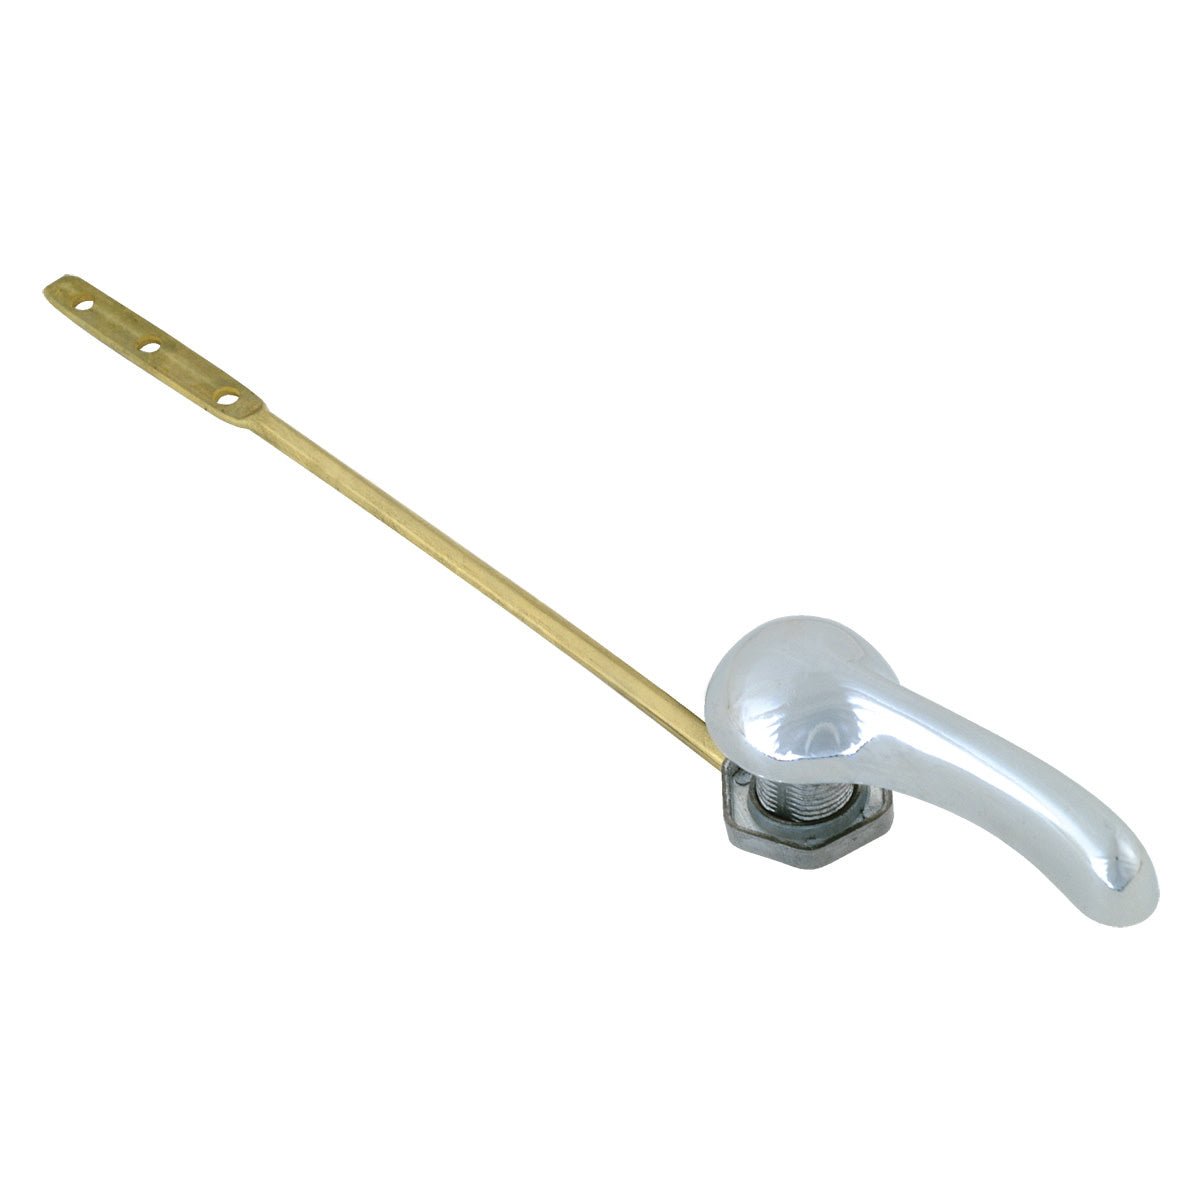 EZ-FLO 8-1/2 in. Brass Arm Toilet Tank Lever with Chrome Handle